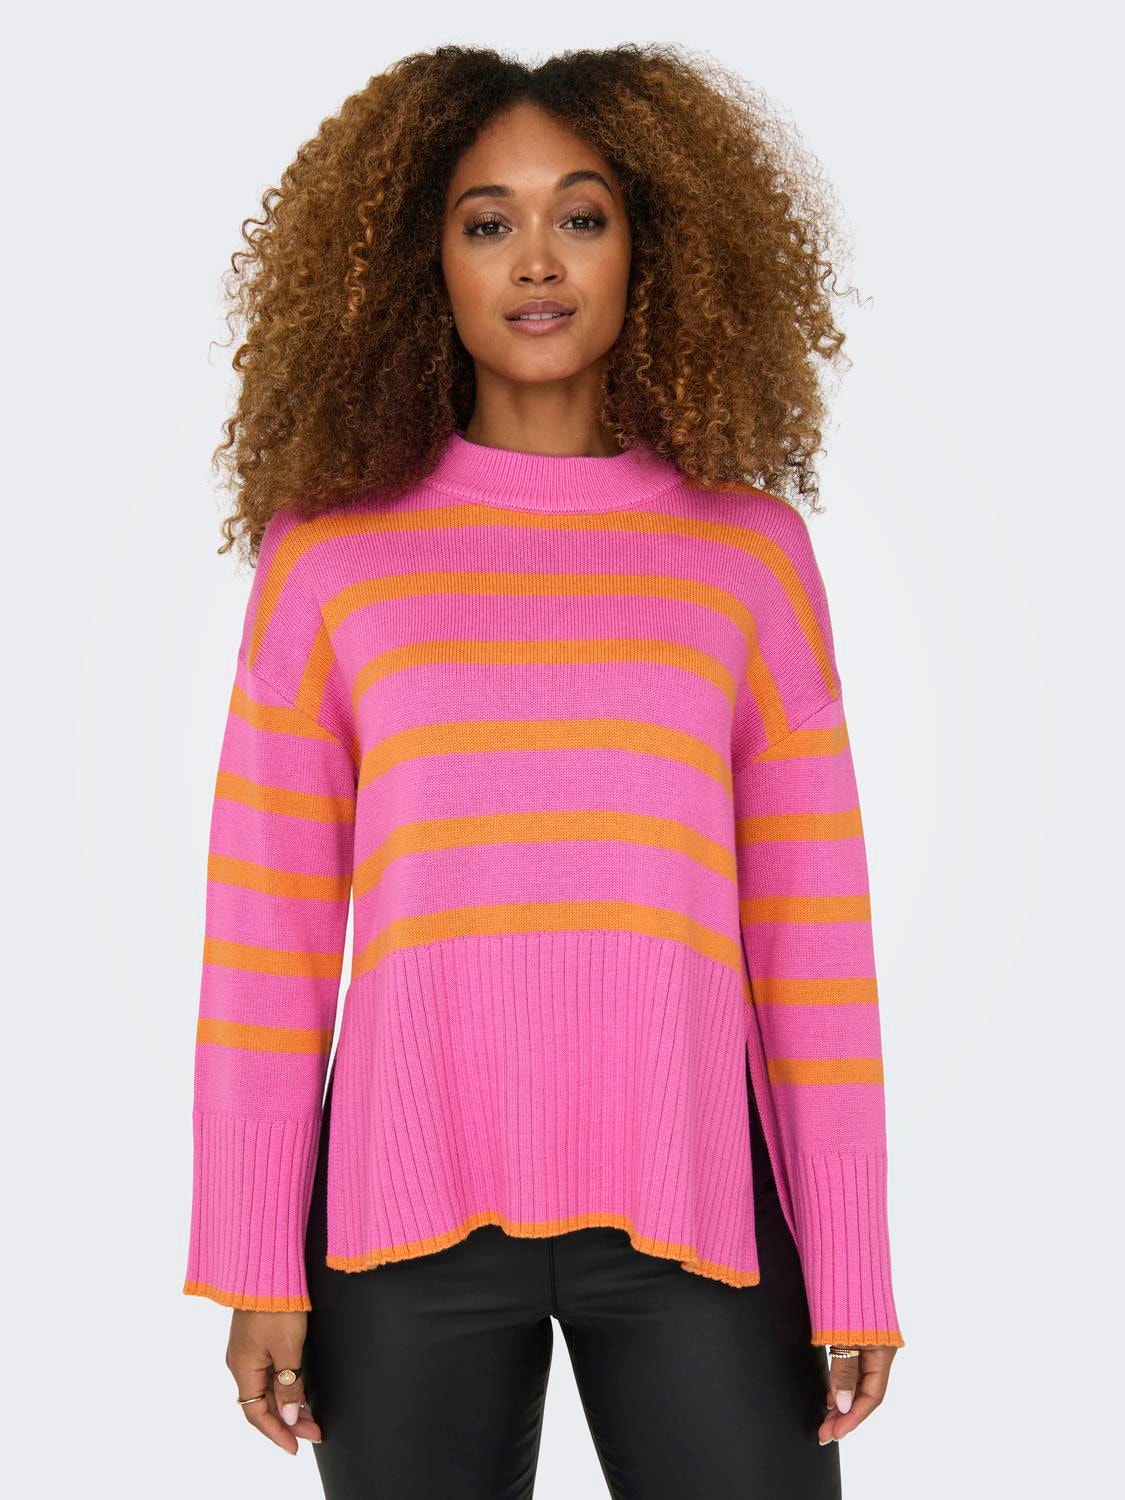 ONLY Round Neck Pullover -Strawberry Moon - 15310564